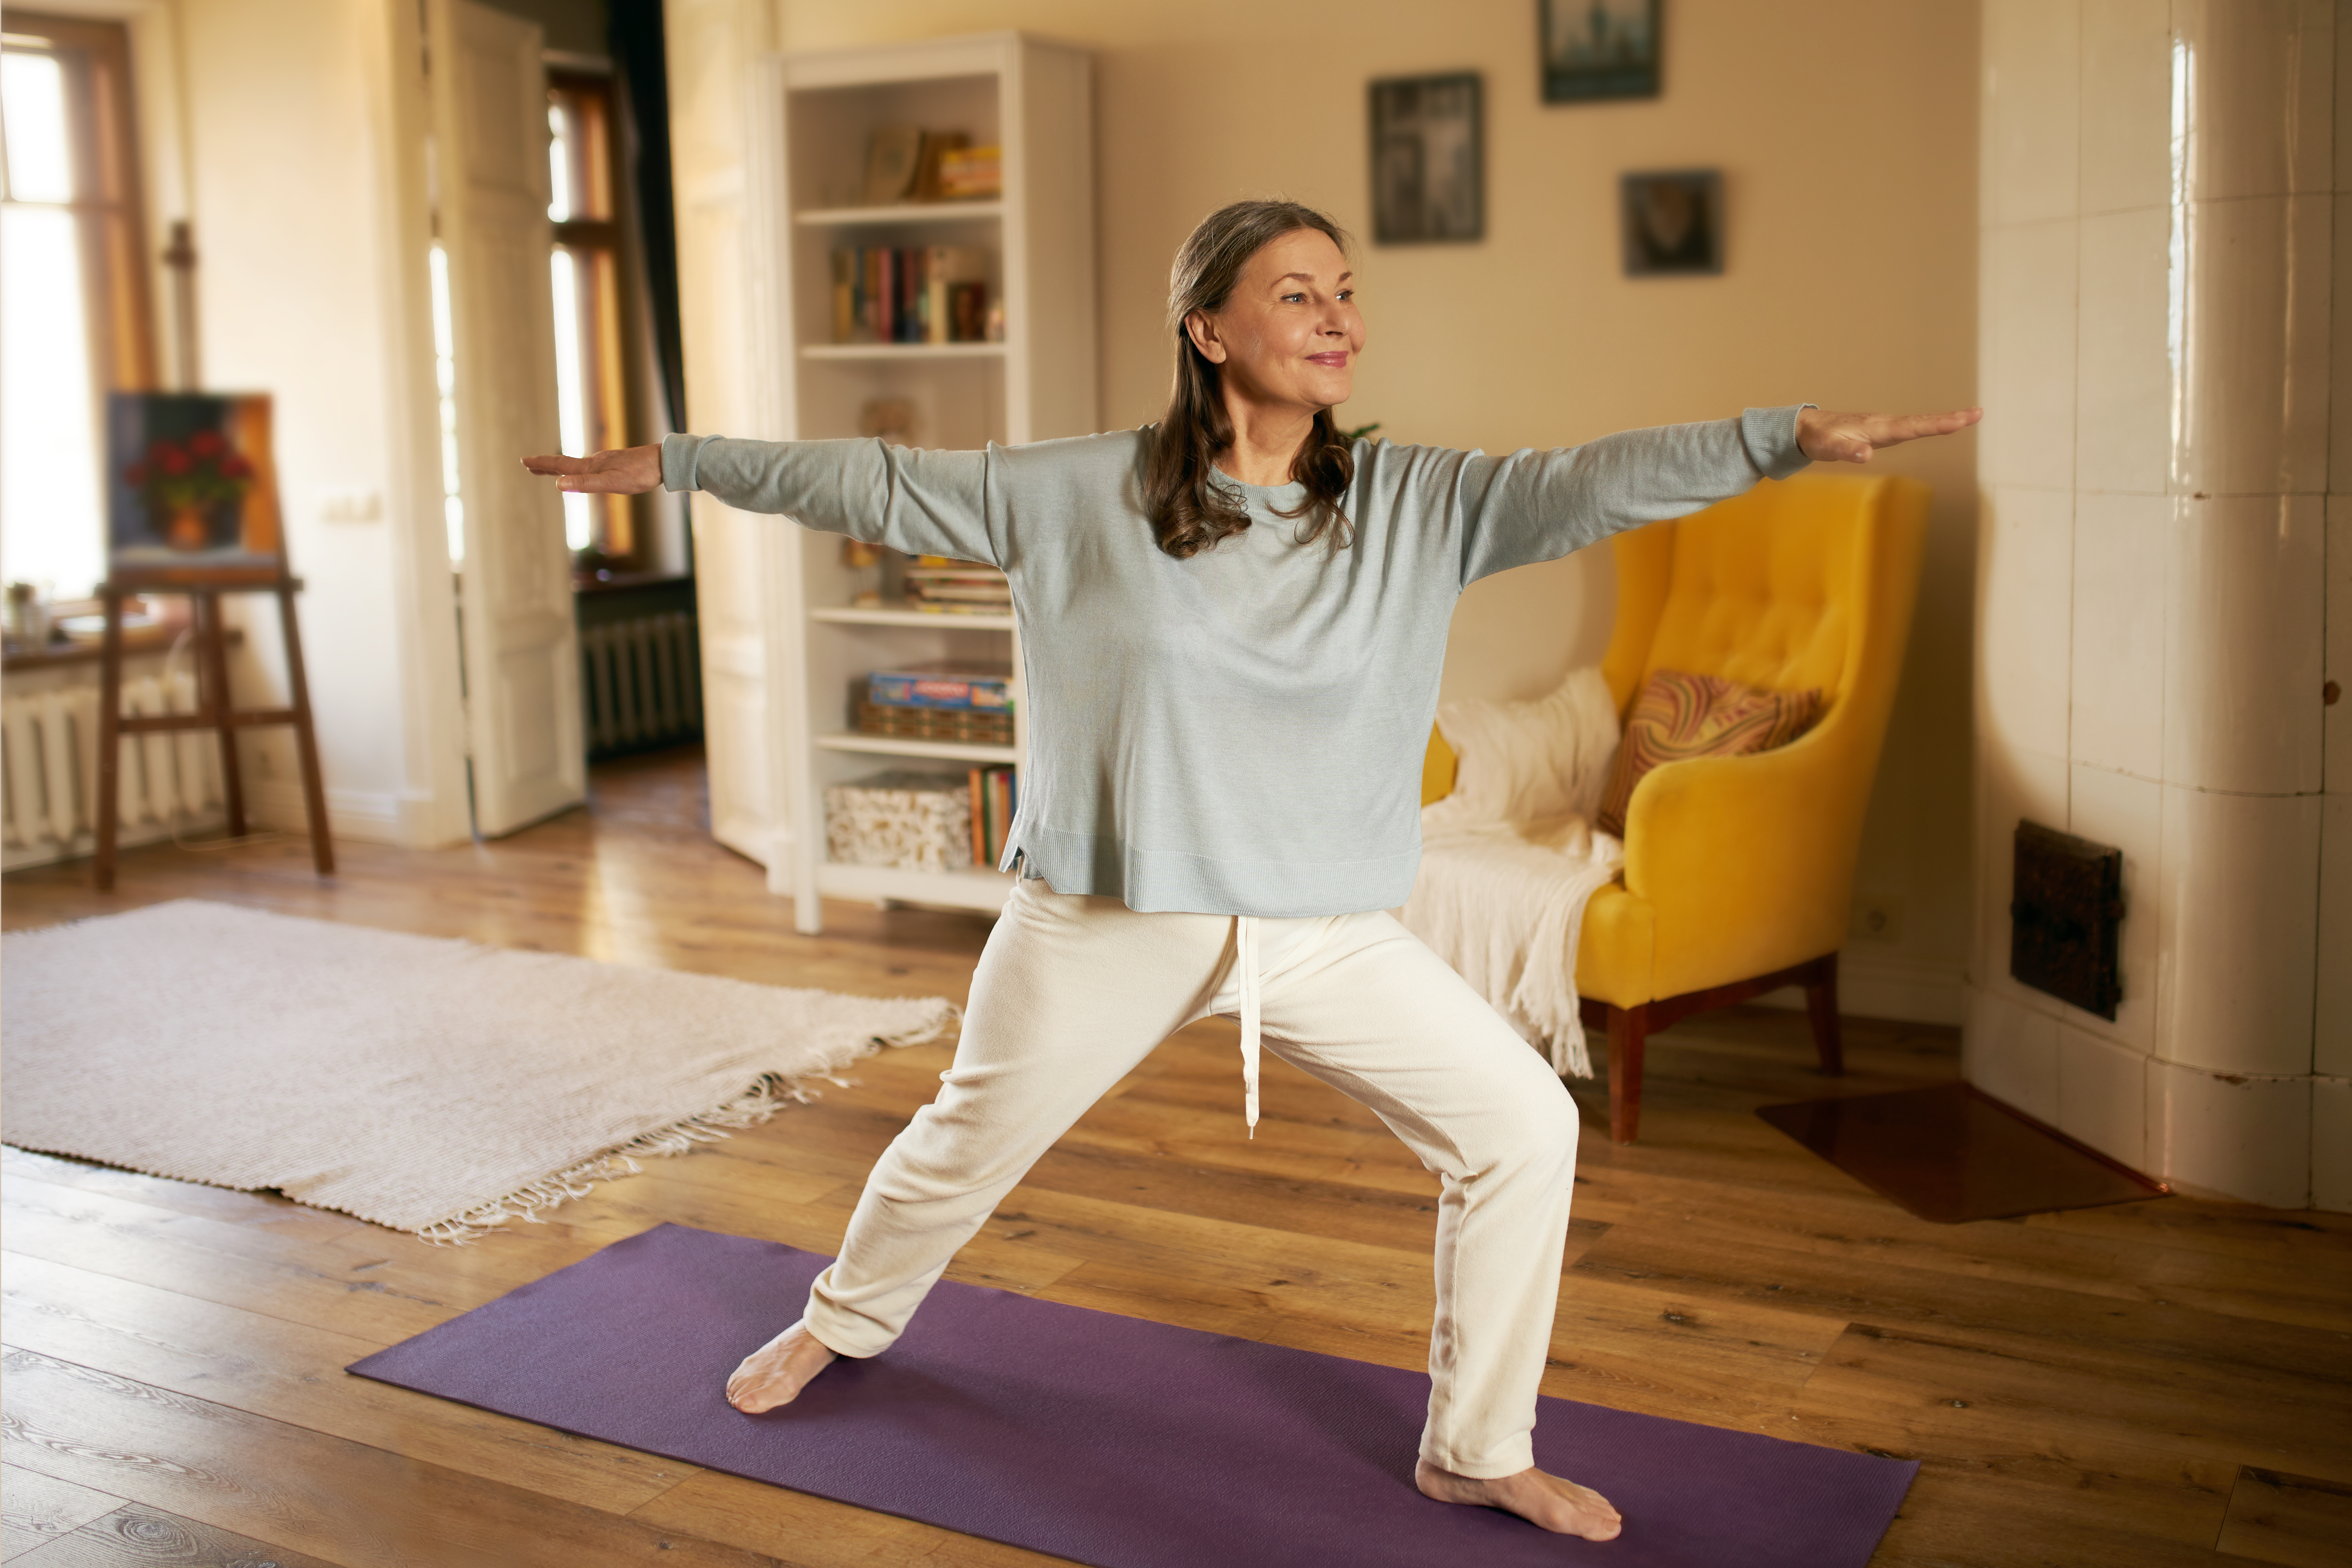 Middle aged woman in living room standing and stretching on Yoga Mat 